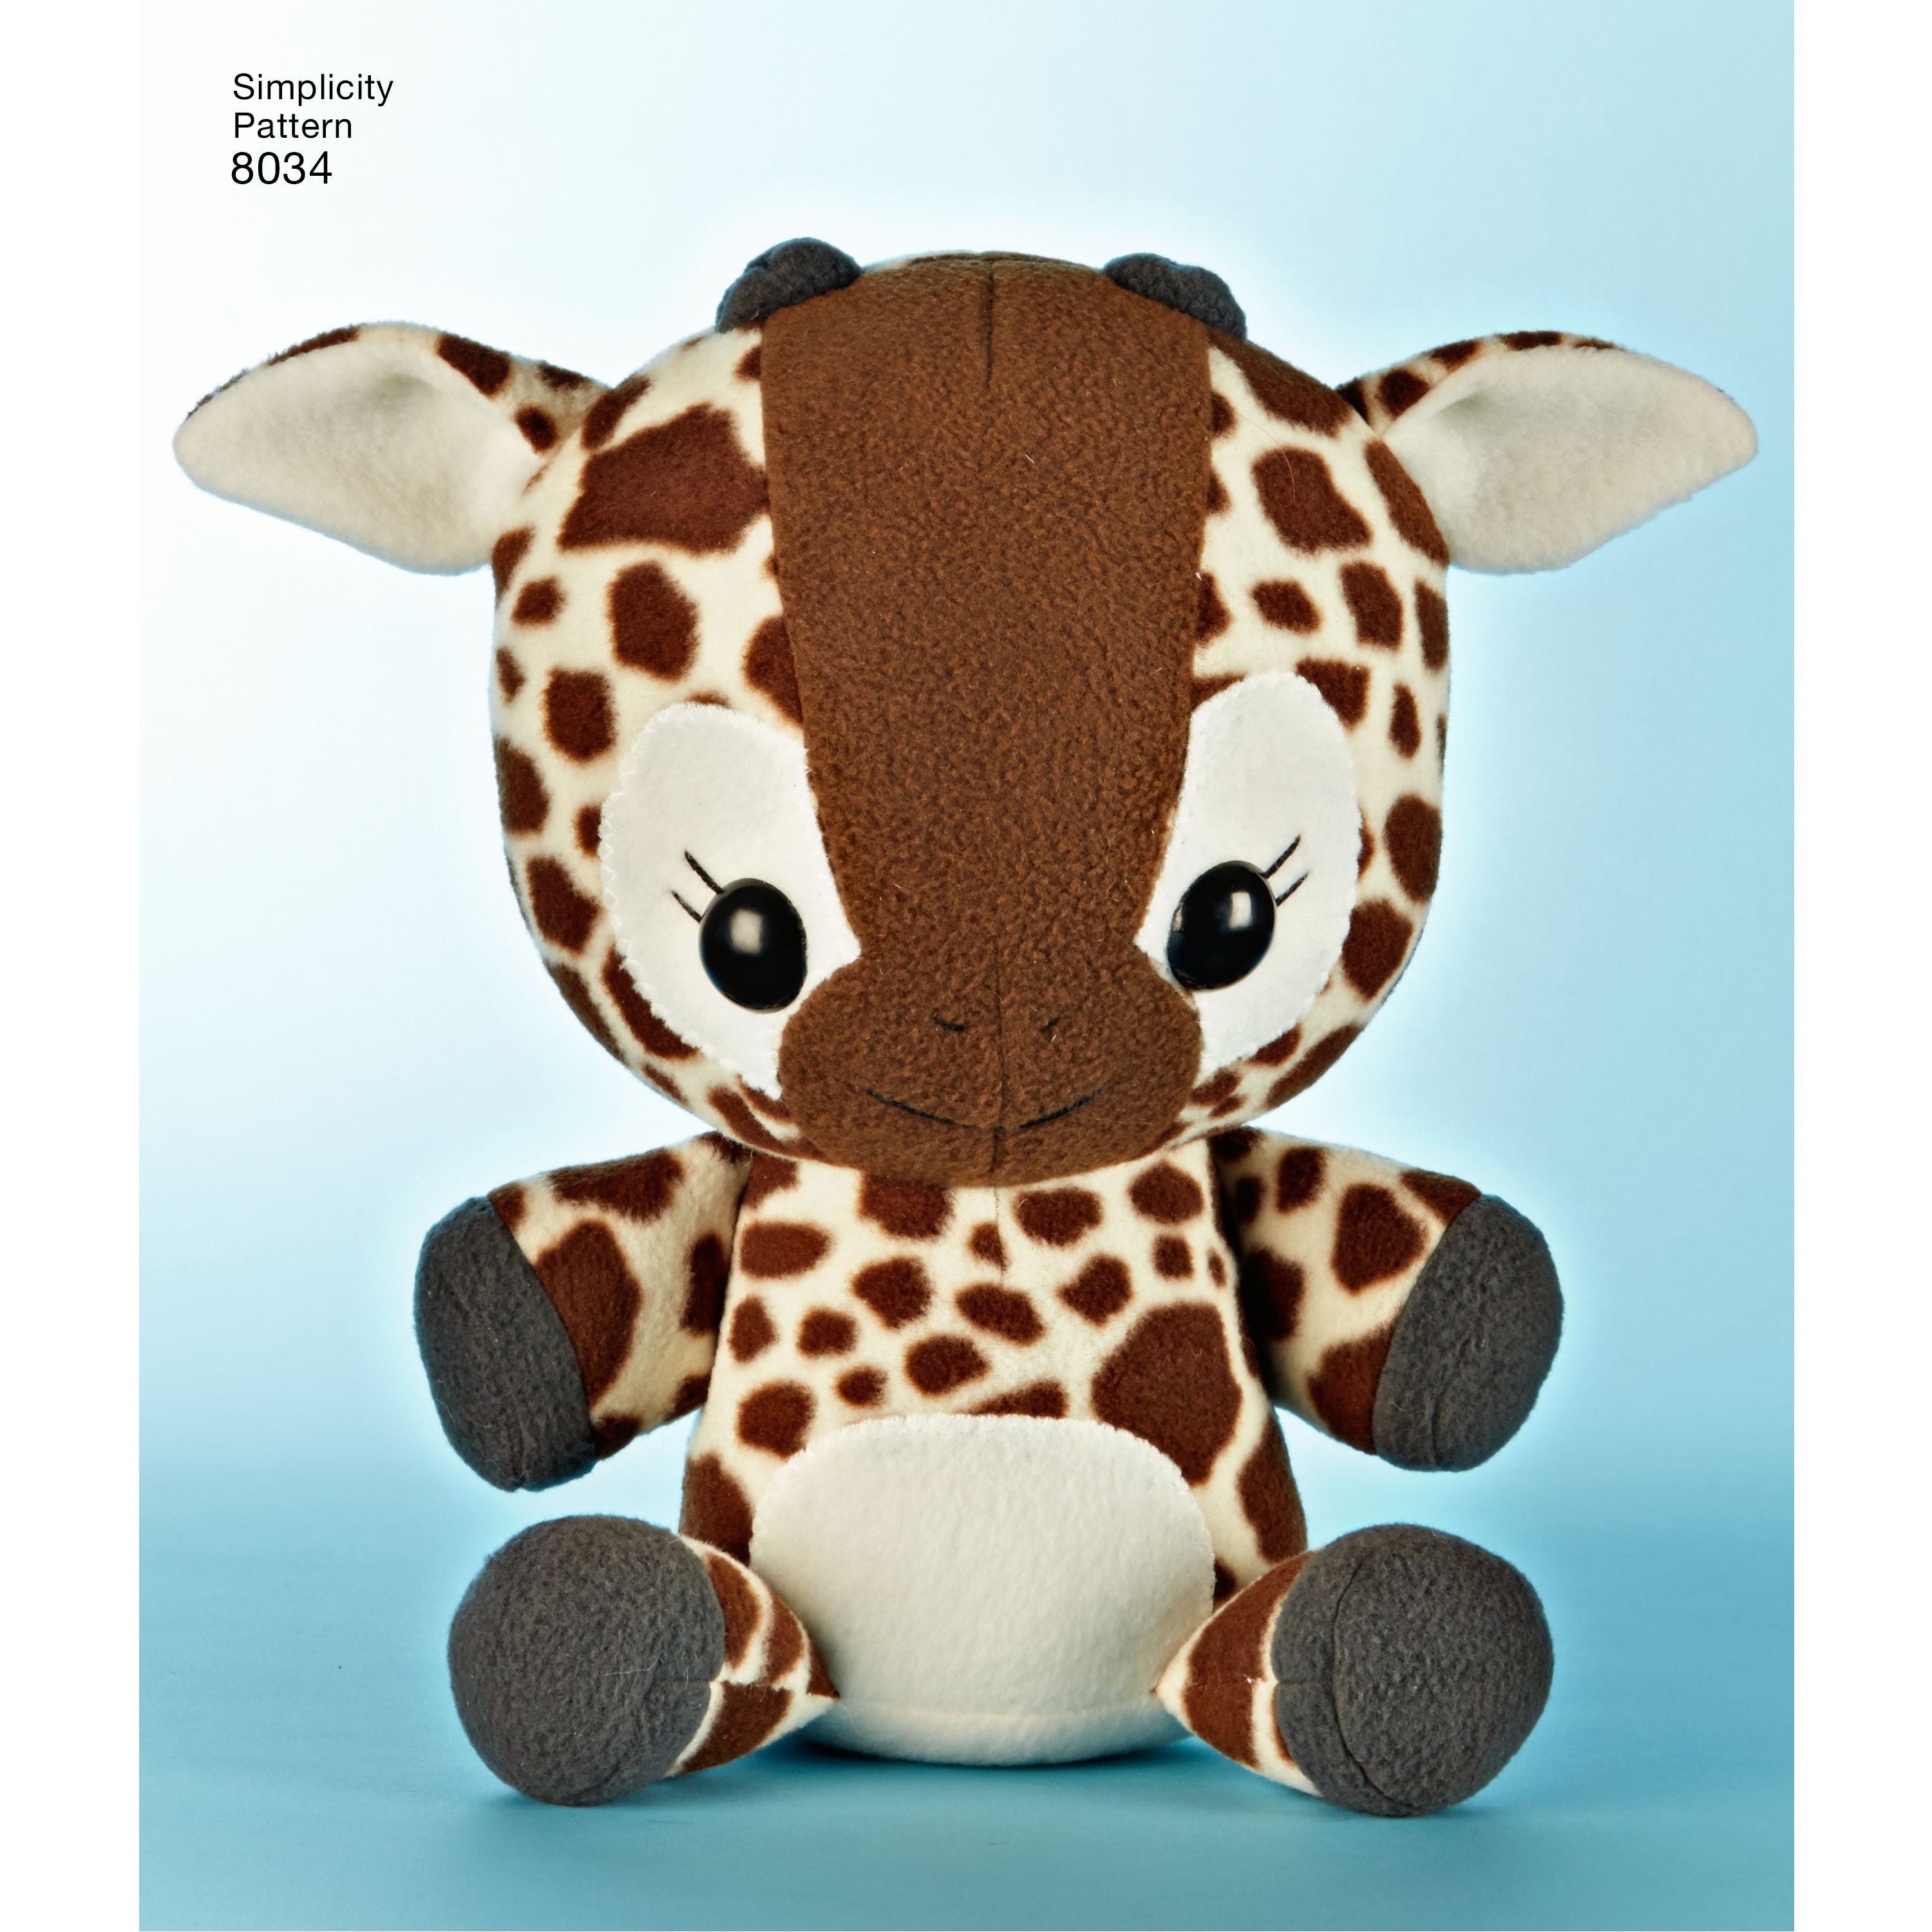 Simplicity Pattern 8034 stuffed animals from Jaycotts Sewing Supplies